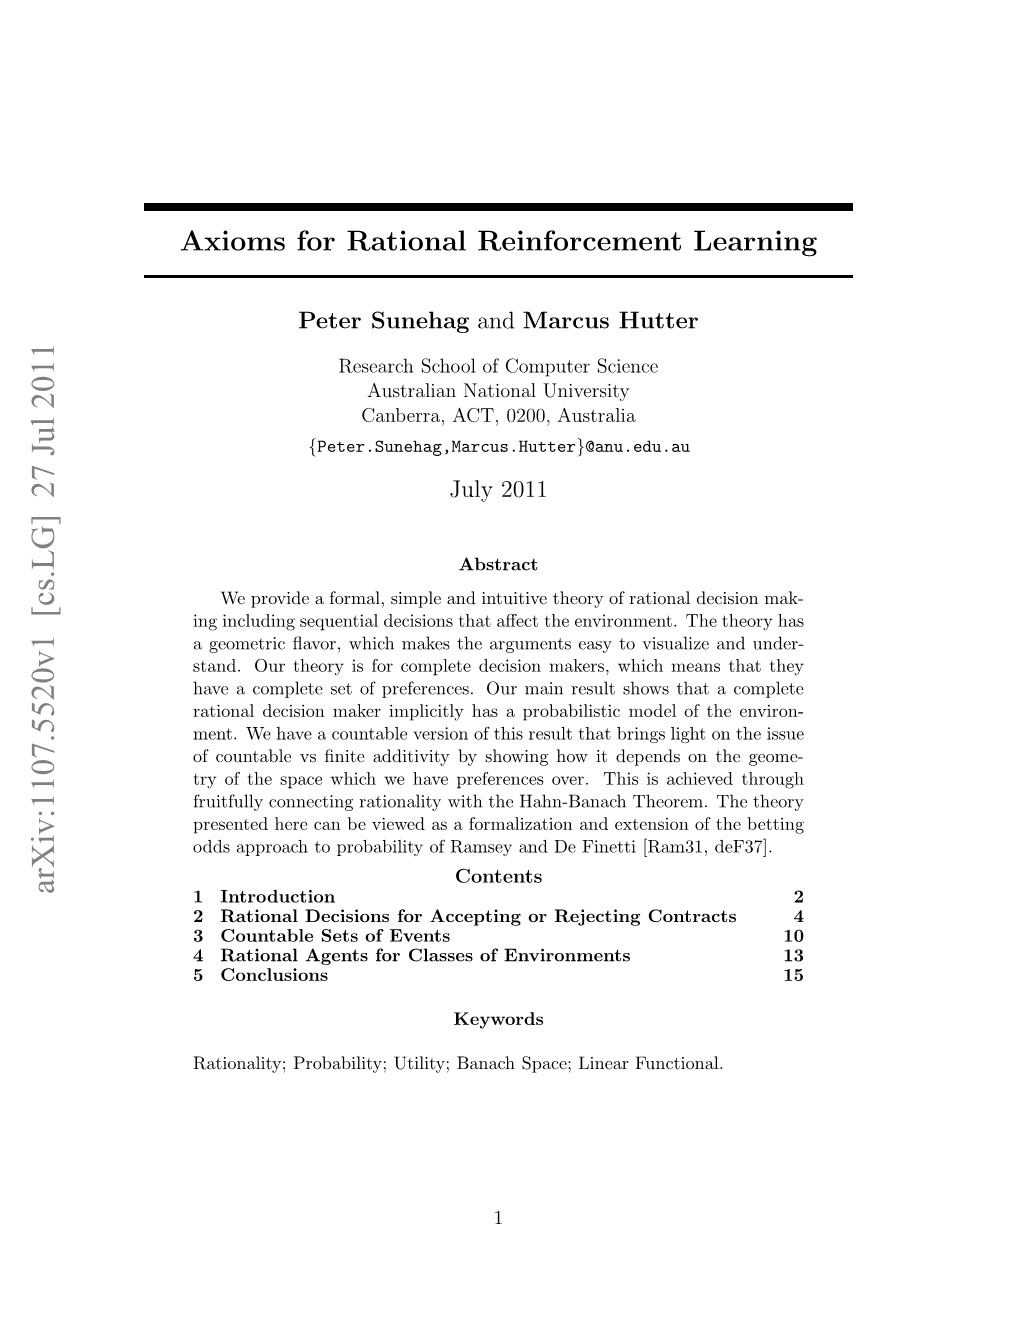 Axioms for Rational Reinforcement Learning